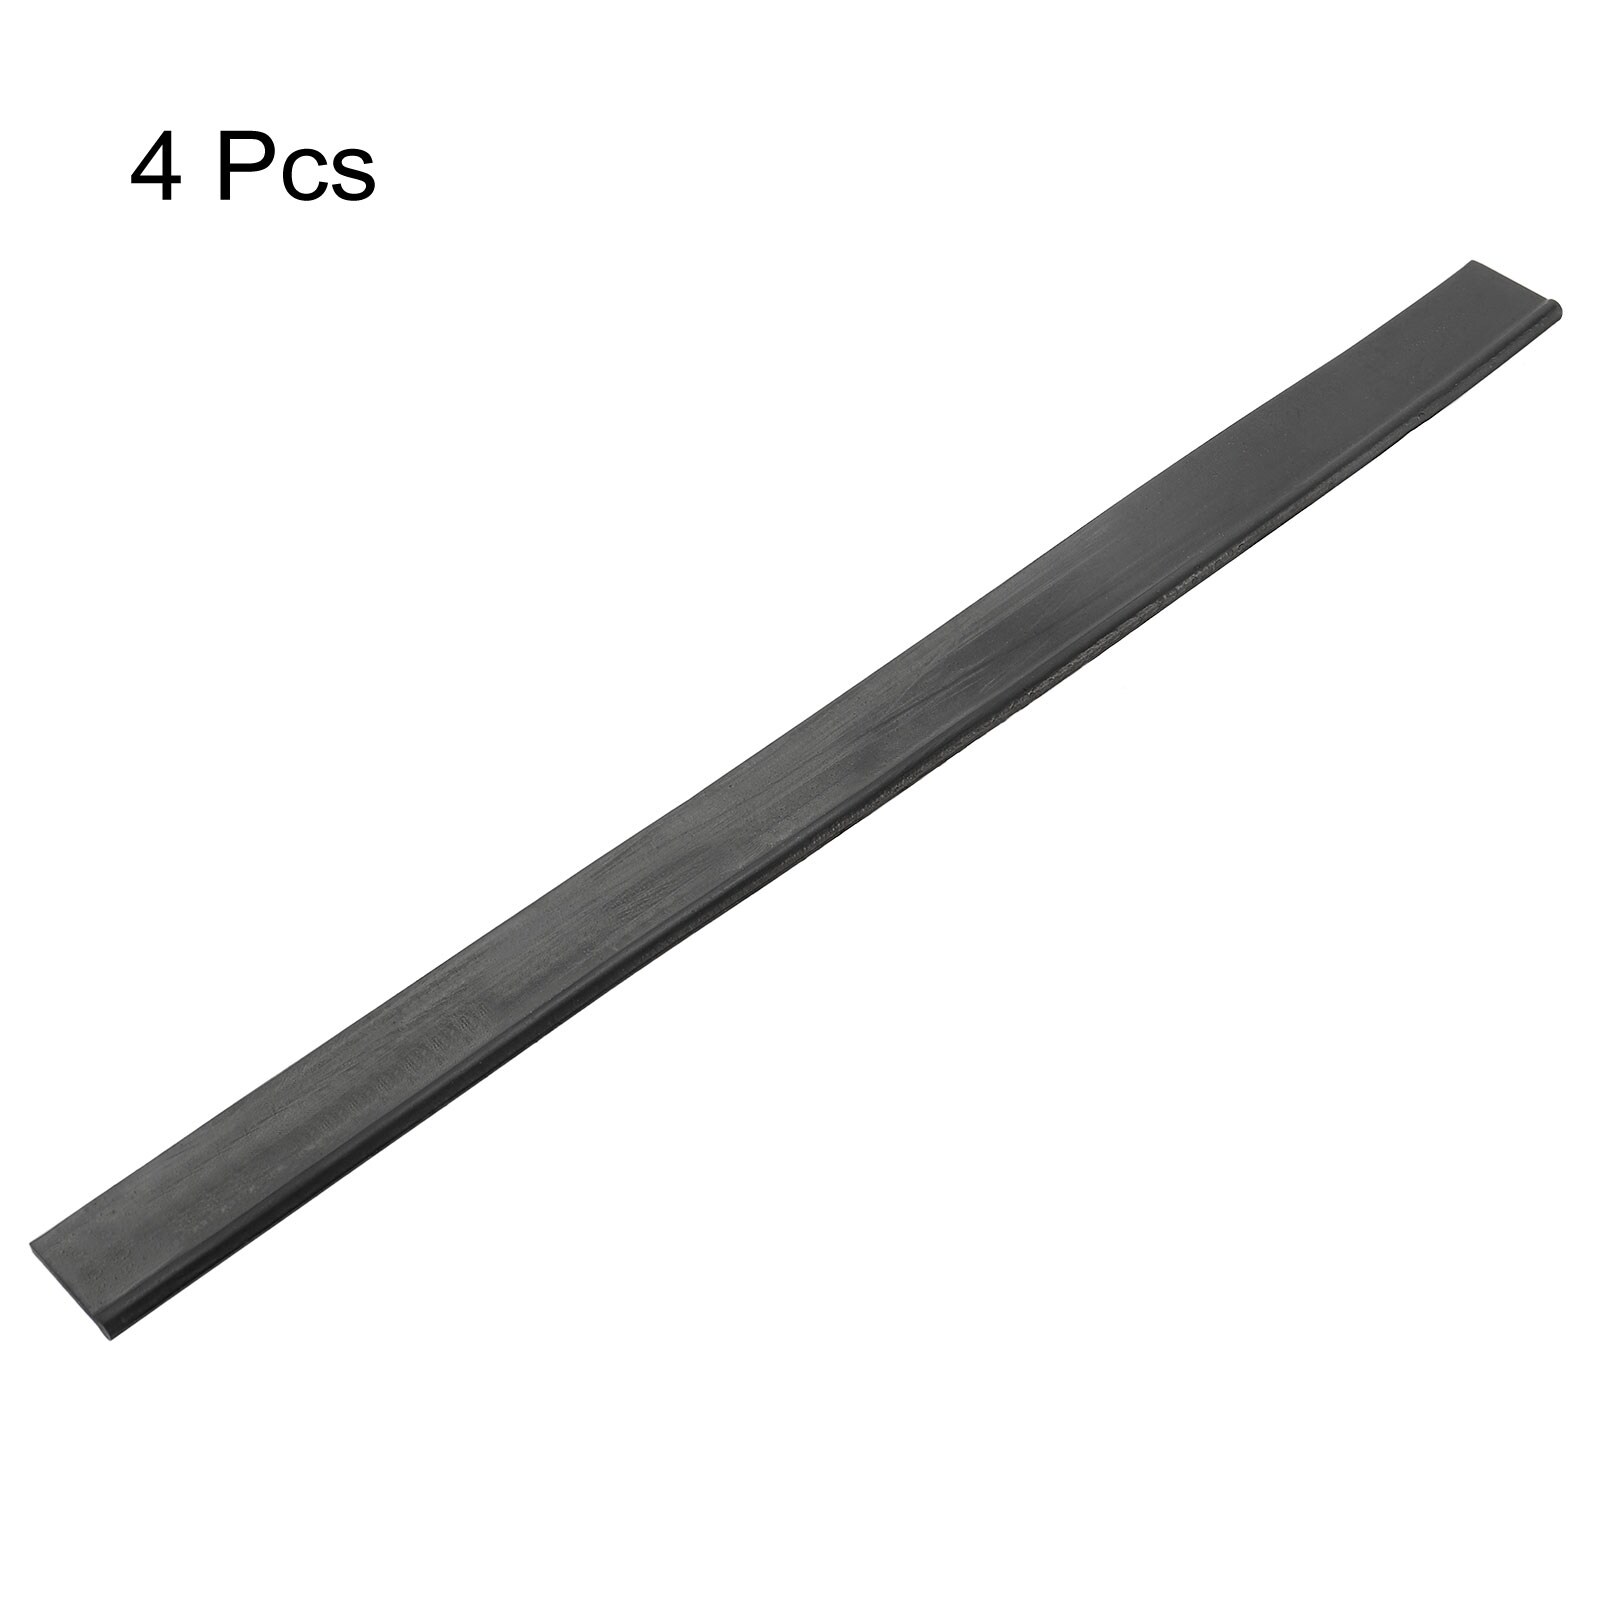 4Pcs Window Glass Shower Doors Replacement Squeegee Rubber 11.81 Inch Black  - Bed Bath & Beyond - 35515949